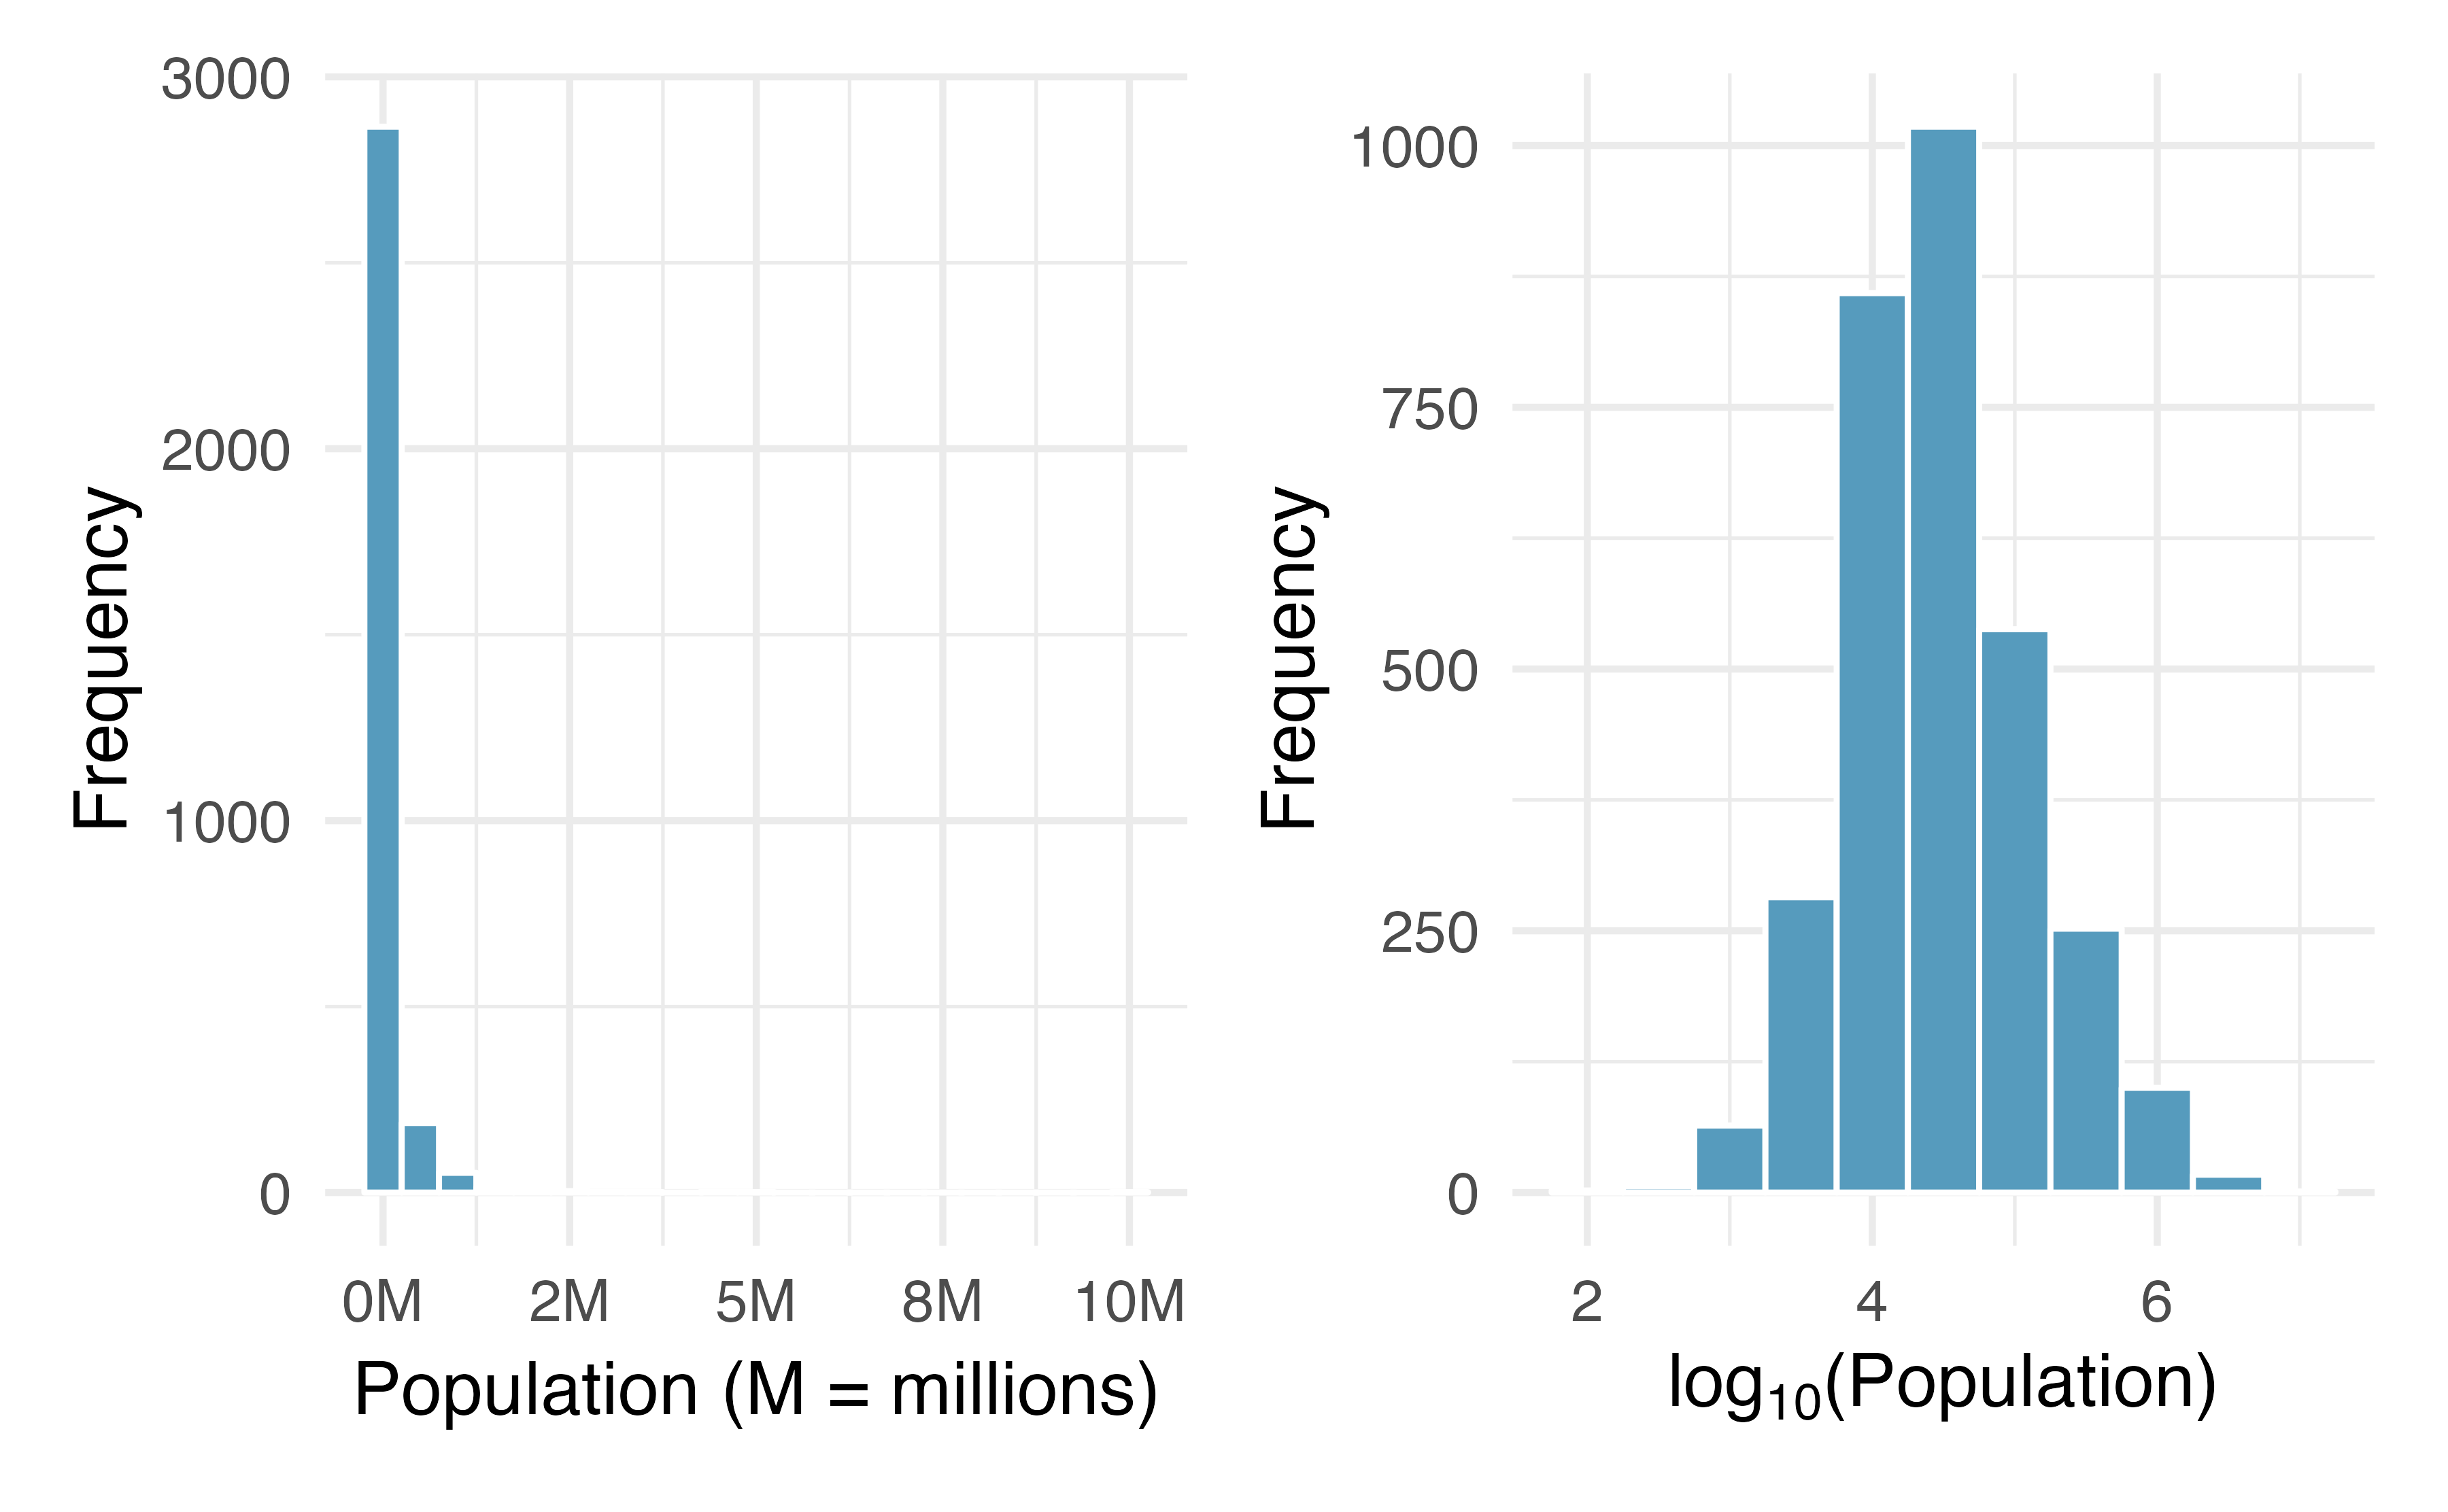 Plot A: A histogram of the populations of all US counties. Plot B: A histogram of log$_{10}$-transformed county populations. For this plot, the x-value corresponds to the power of 10, e.g. 4 on the x-axis corresponds to $10^4 =$ 10,000. Data are from 2017.